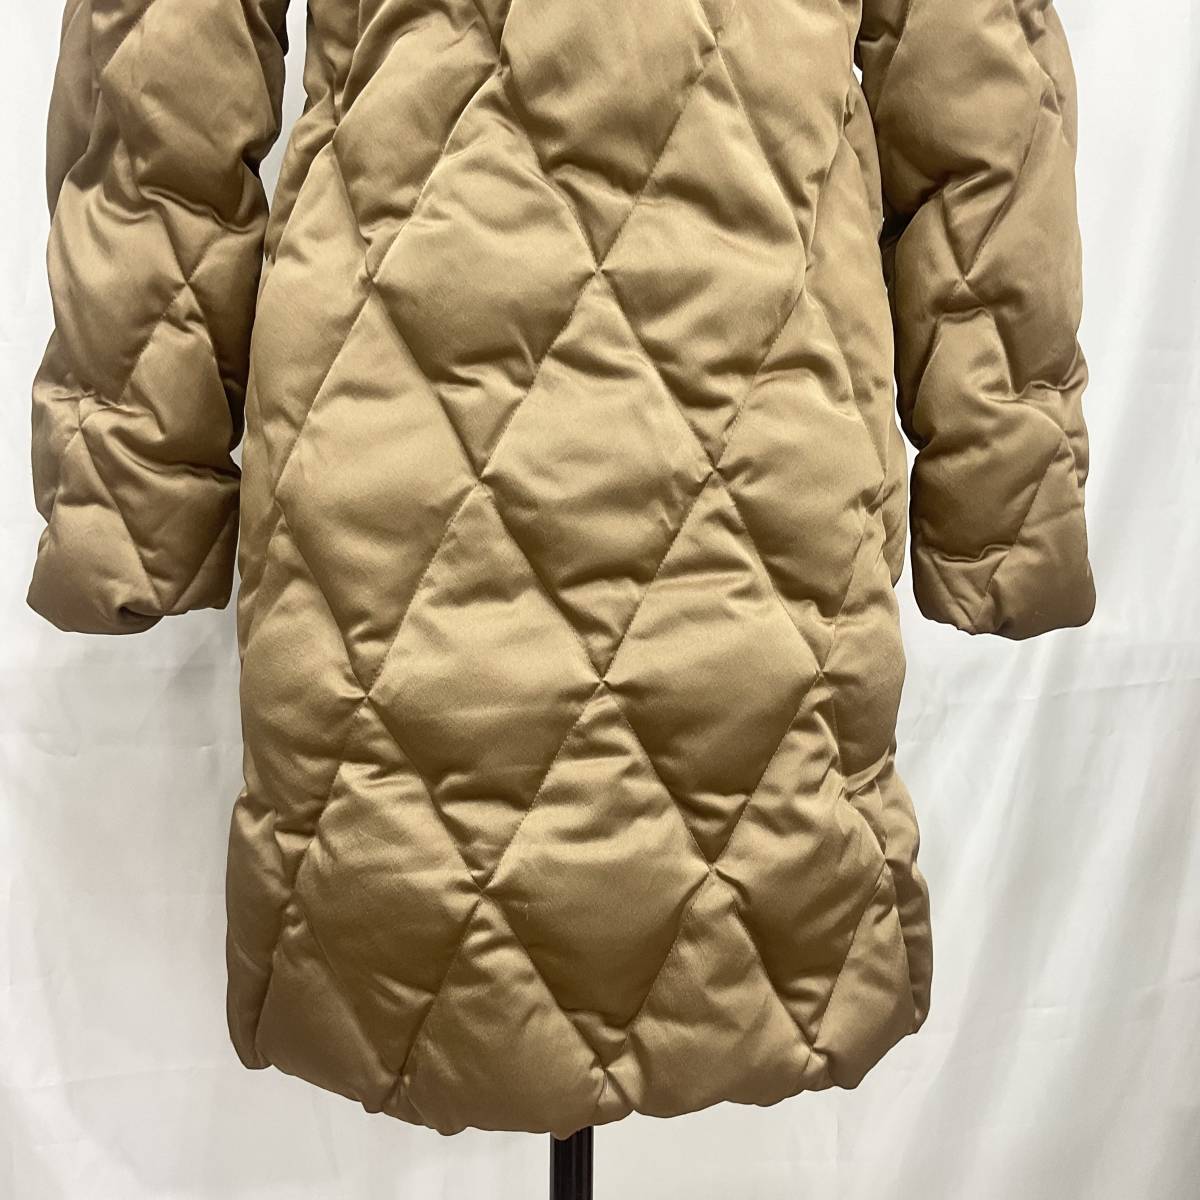 MAYSON GREY Mayson Grey quilting down coat size2 M size jacket long coat Camel lady's outer (C879)